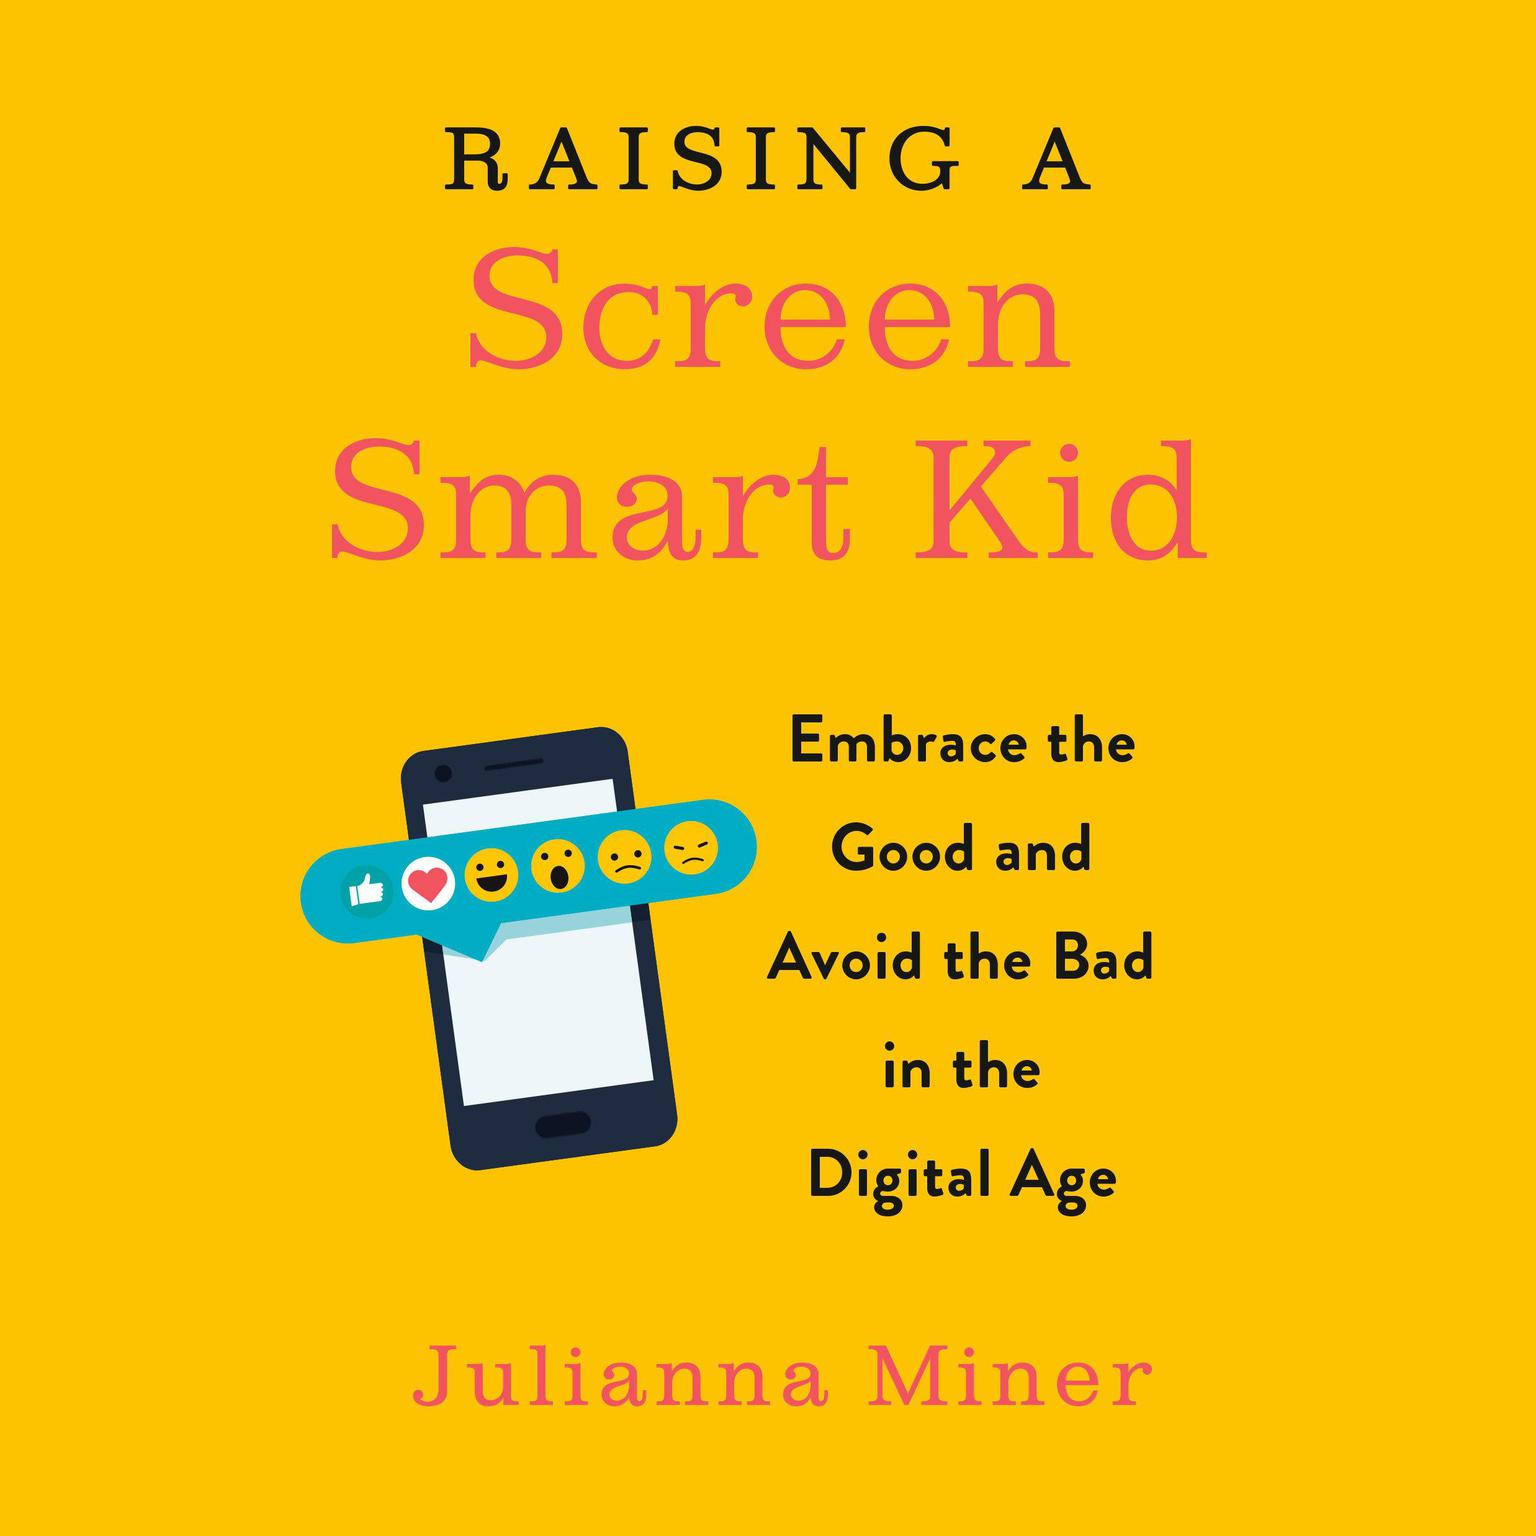 Raising a Screen-Smart Kid: Embrace the Good and Avoid the Bad in the Digital Age Audiobook, by Julianna Miner